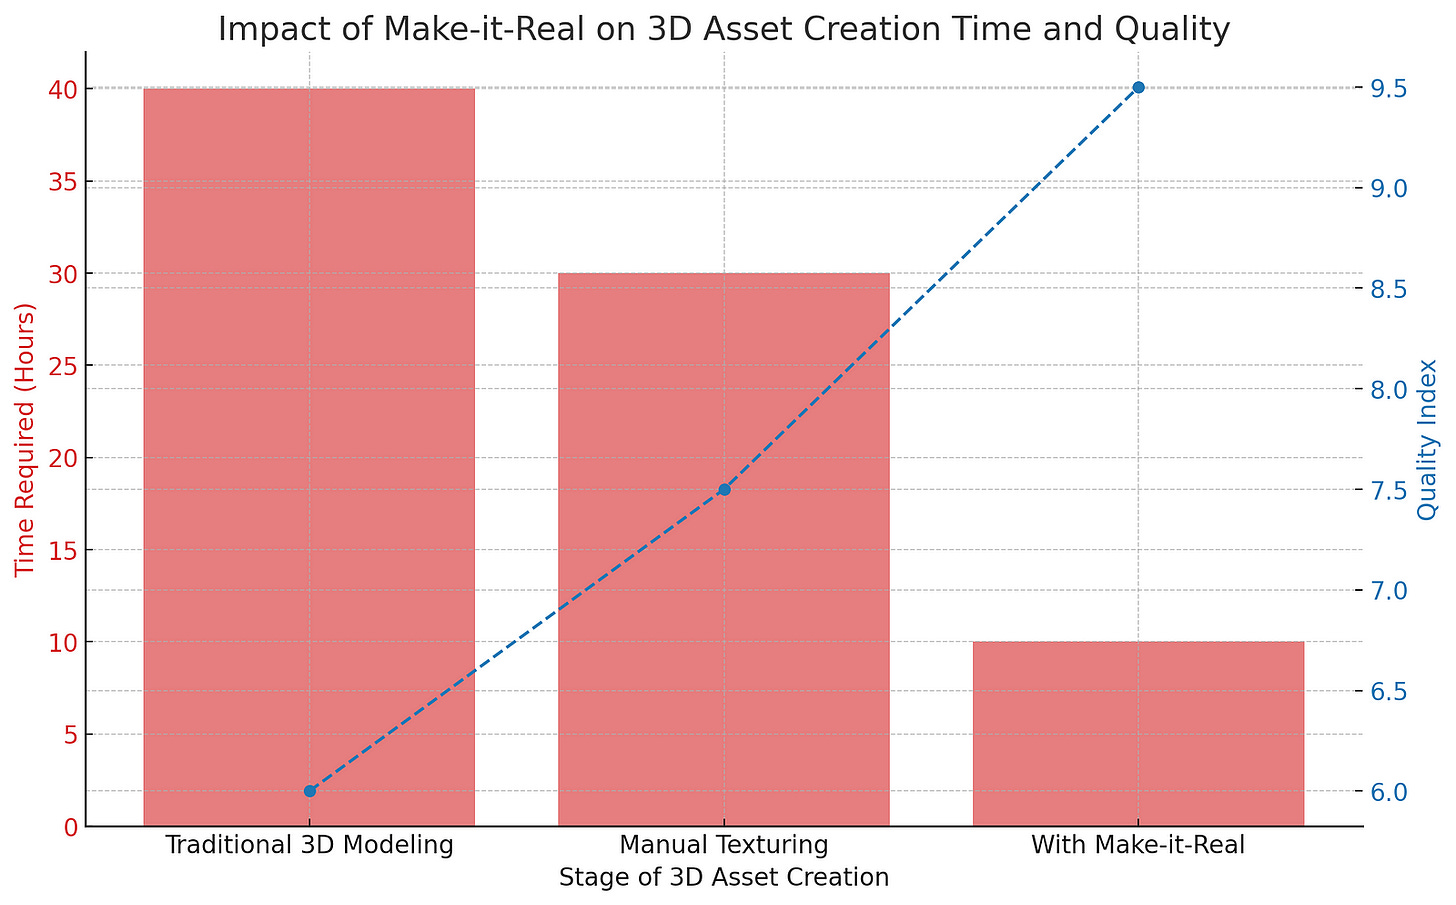 A bar and line graph displaying the reduction in time required and the increase in quality index for 3D asset creation across three stages: Traditional 3D Modeling, Manual Texturing, and With Make-it-Real. The bar graph shows a decrease in time from 40 hours to 10 hours, while the line graph shows an increase in quality from 6 to 9.5 on a scale of 10.